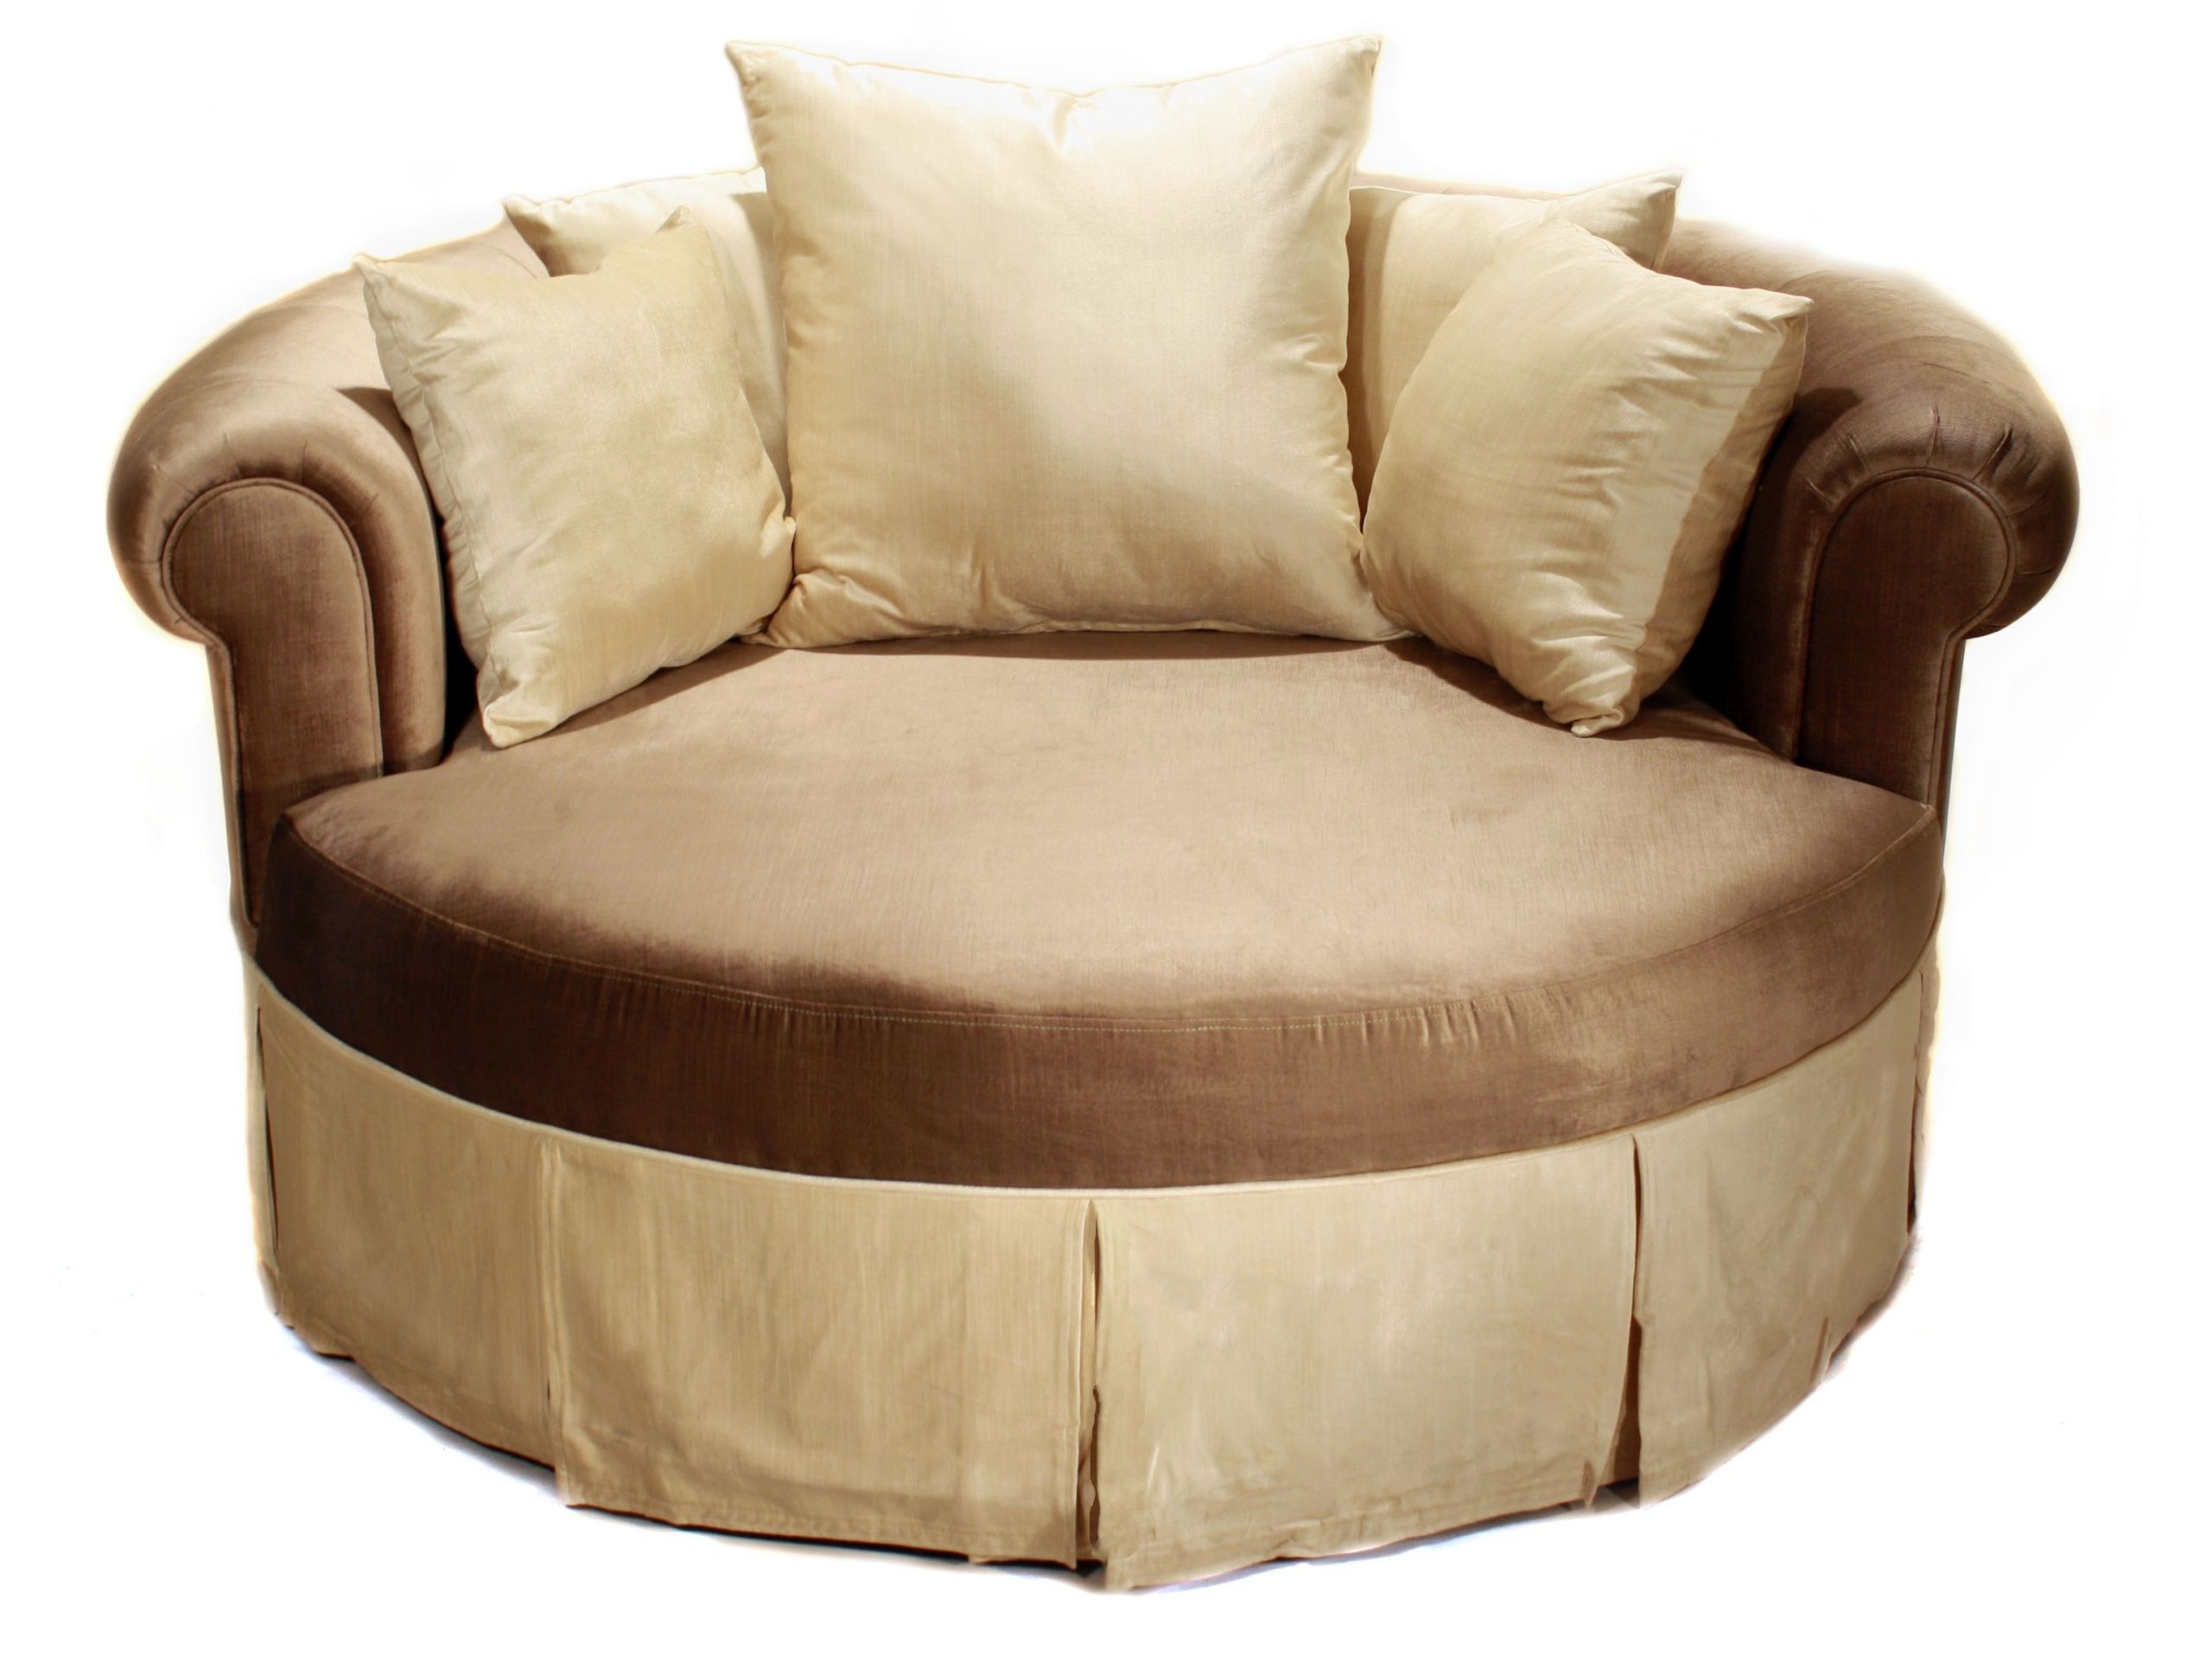 Sessel Garten Genial Cozy Round Chair I Could totally Read In This Chair